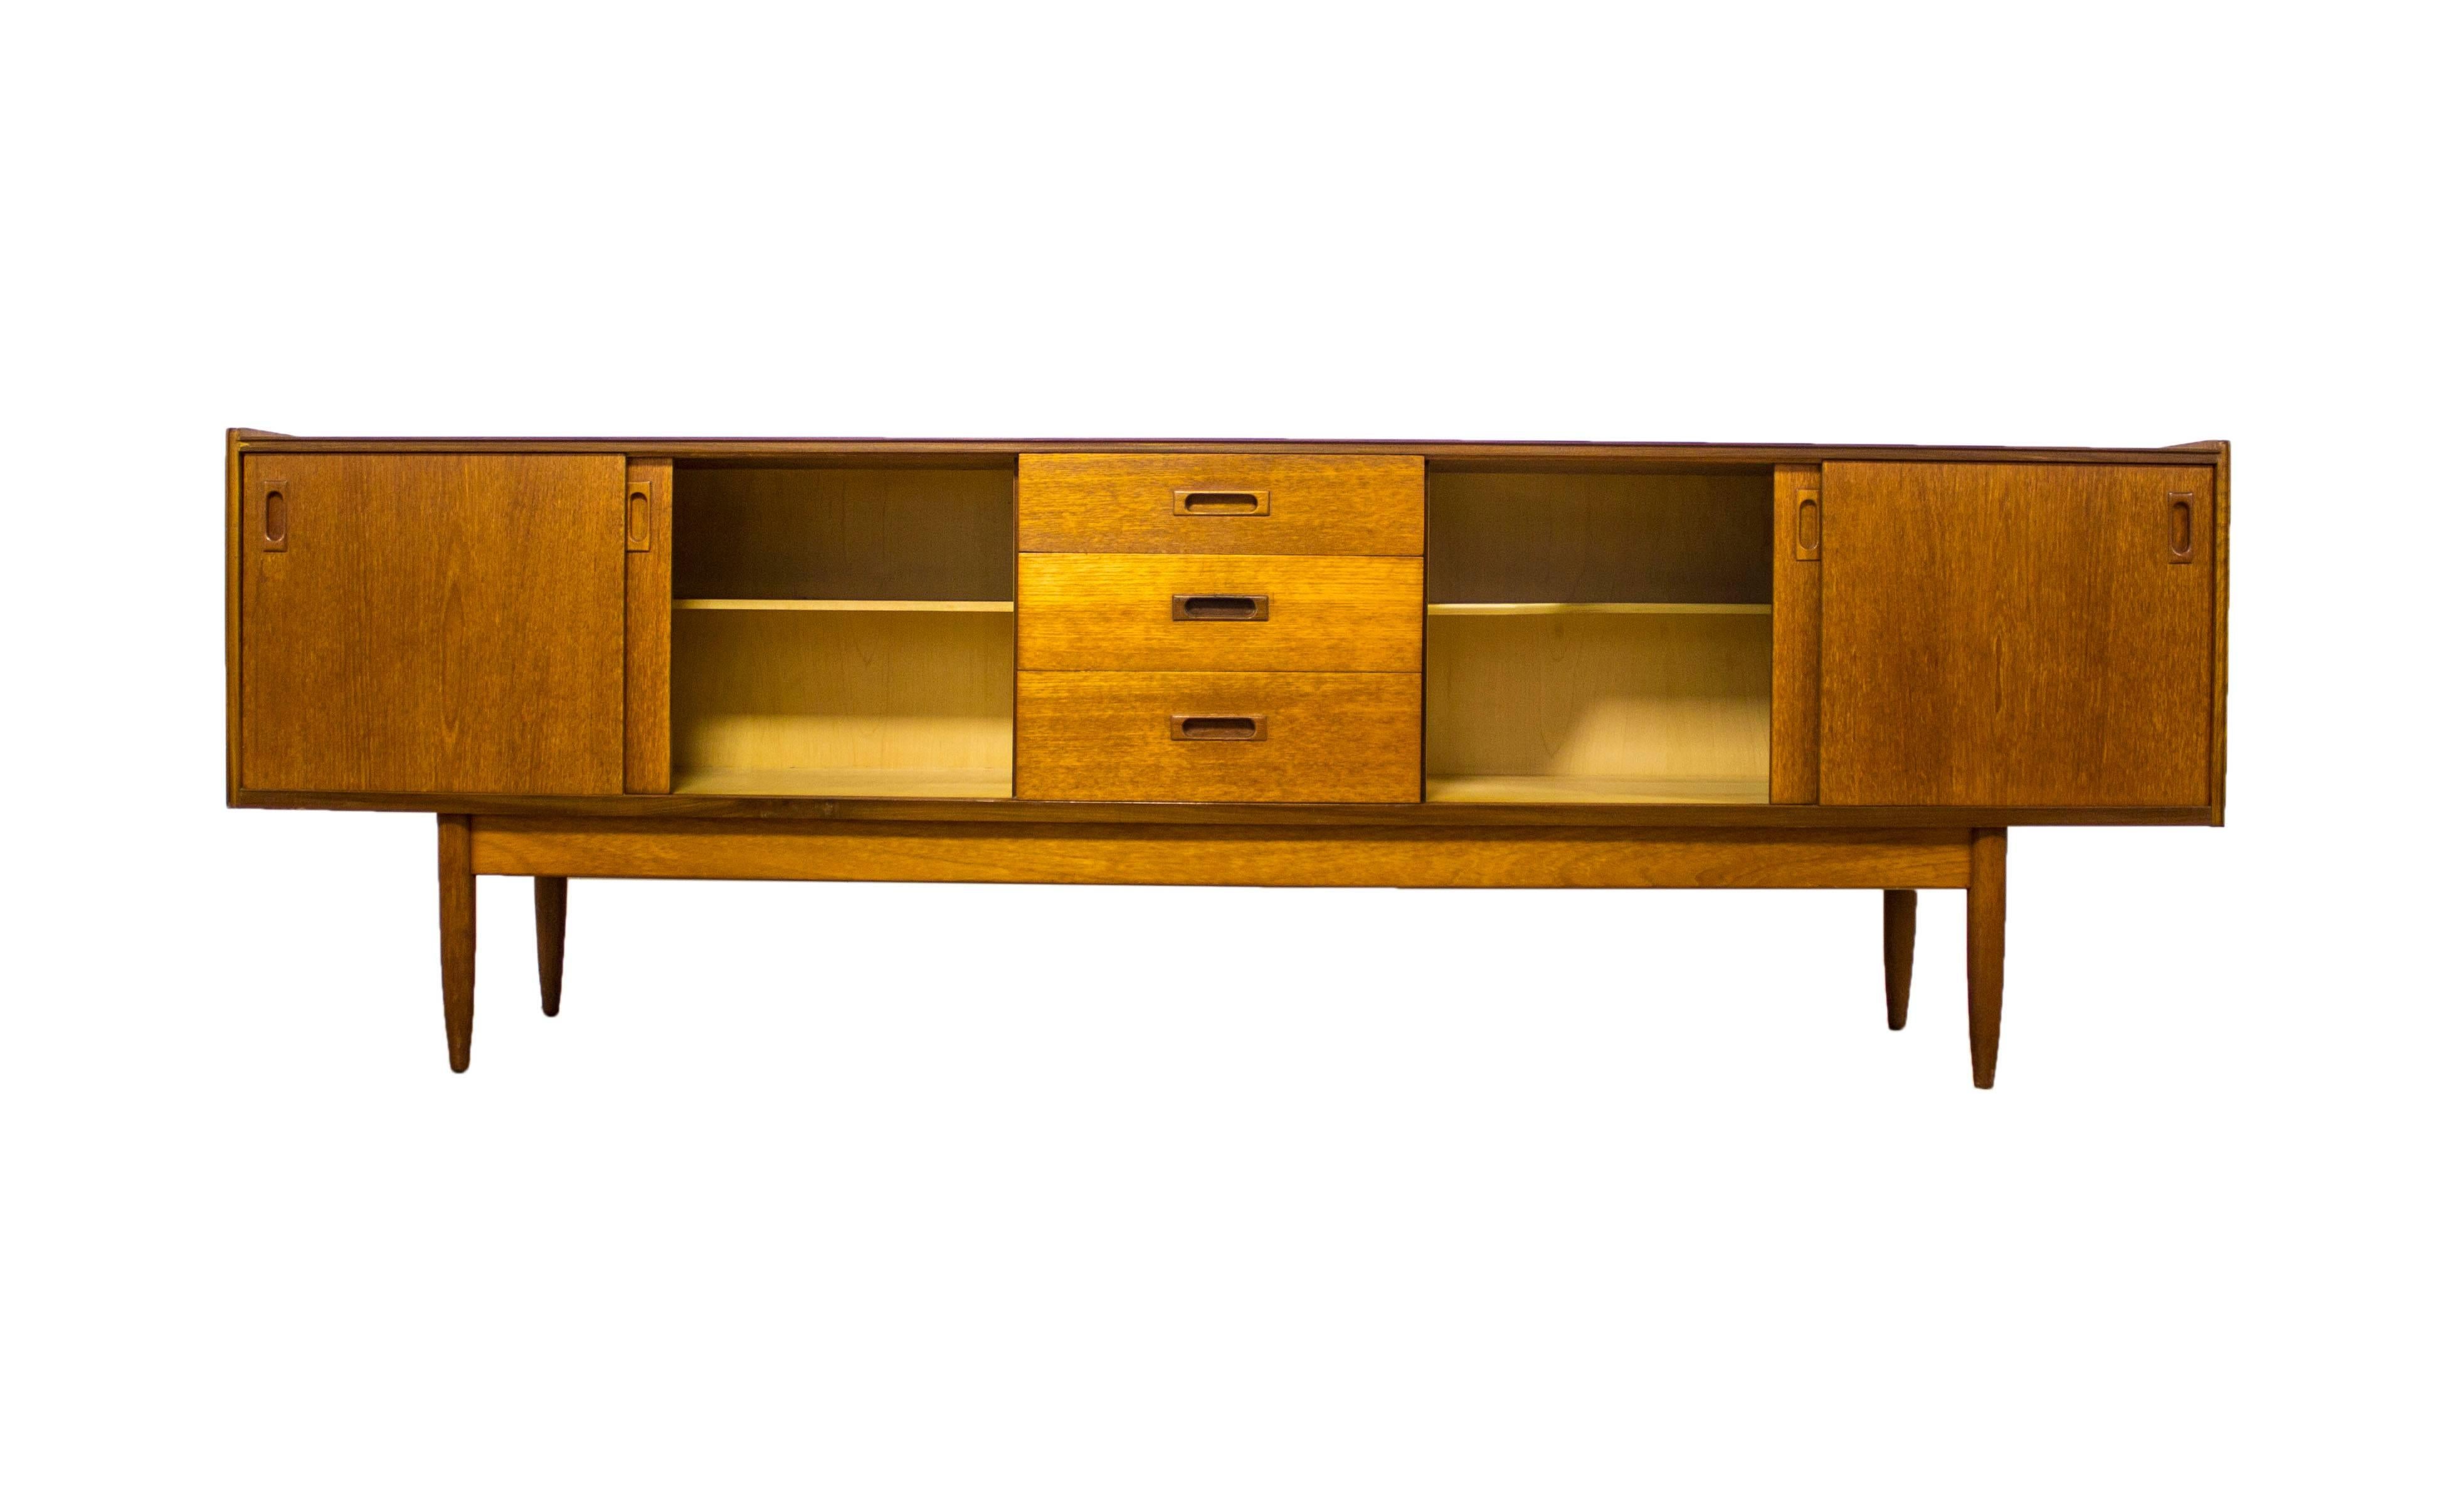 The Danish designers of the Mid-Century movement brought clean, simple lines to the masses and introduced the world to the wonders of teak in it’s many guises, stunning grain and rich colors.
This beautiful and rich sideboard features ample storage